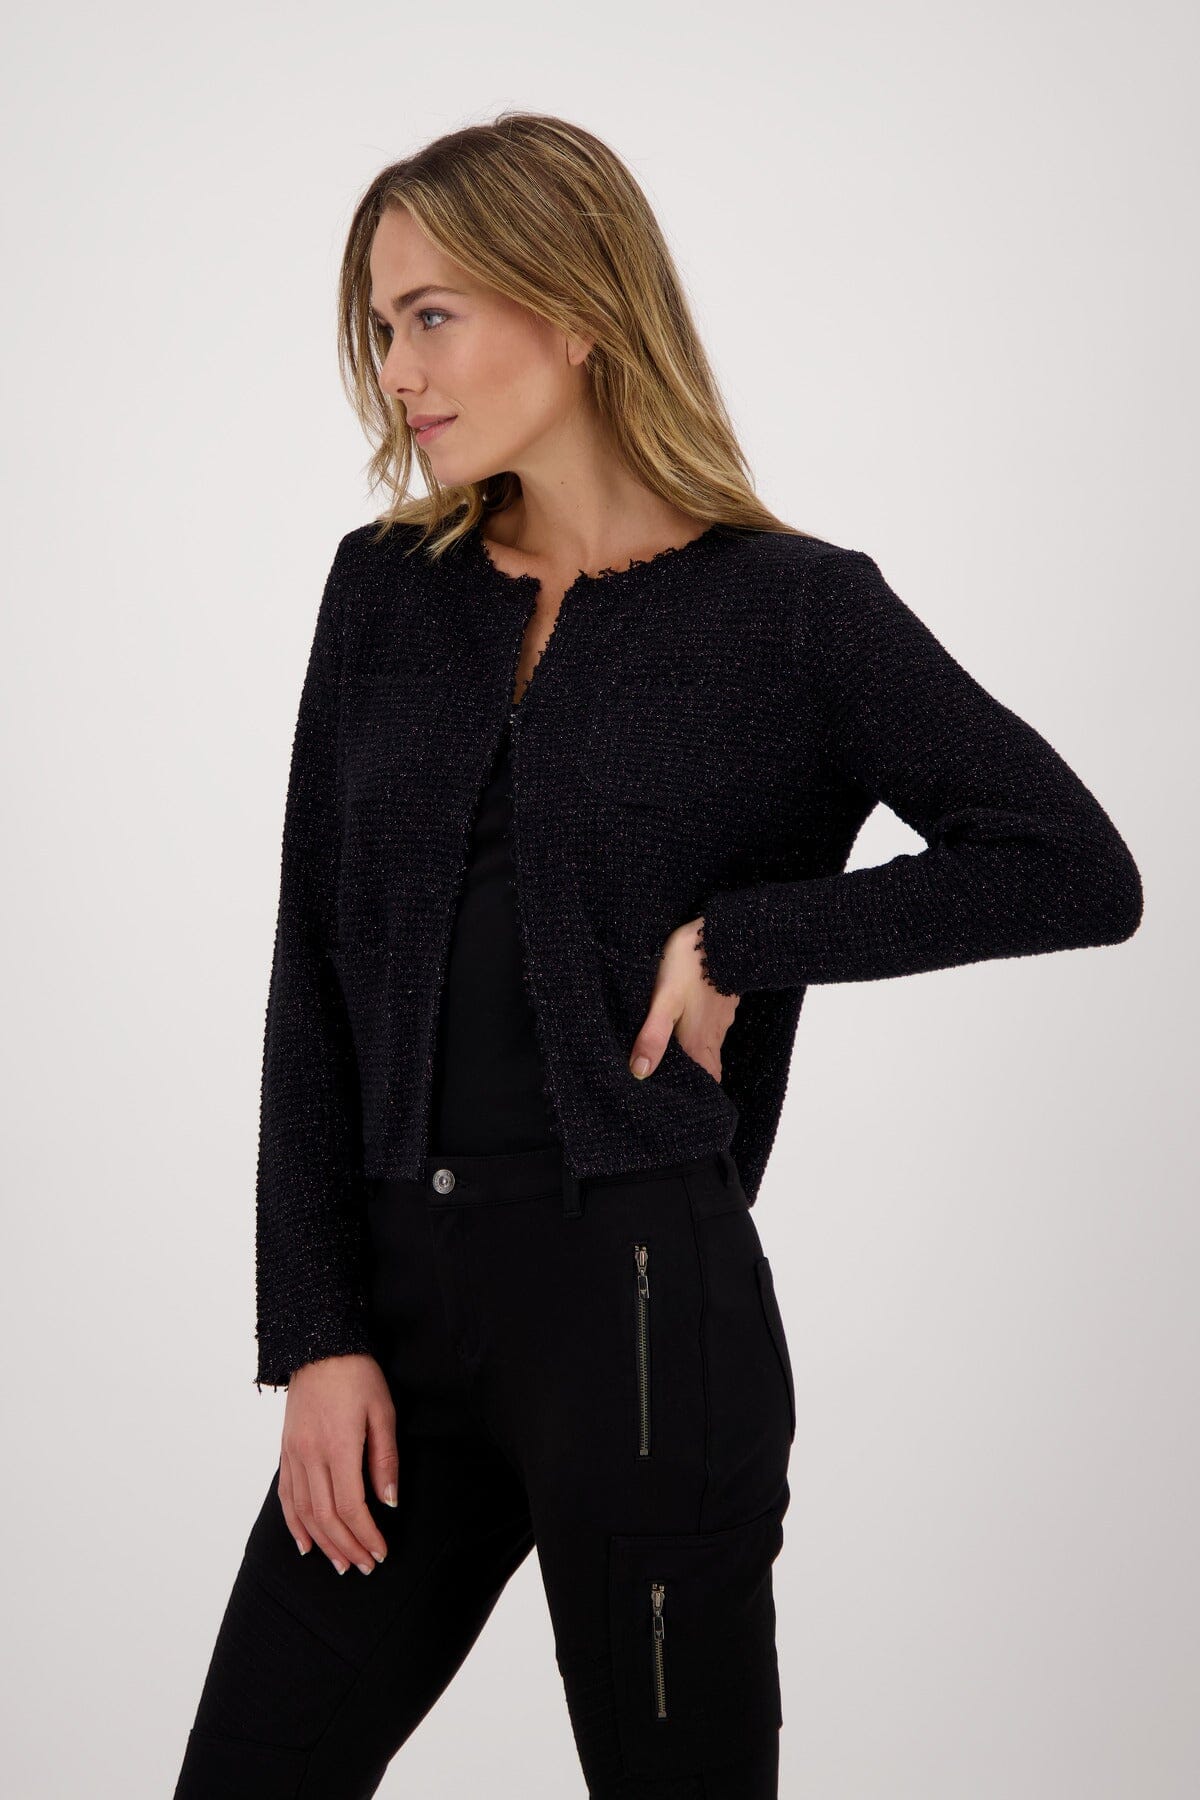 Monari Waist Black Cardigan – The One & Only Shoes, Clothing and